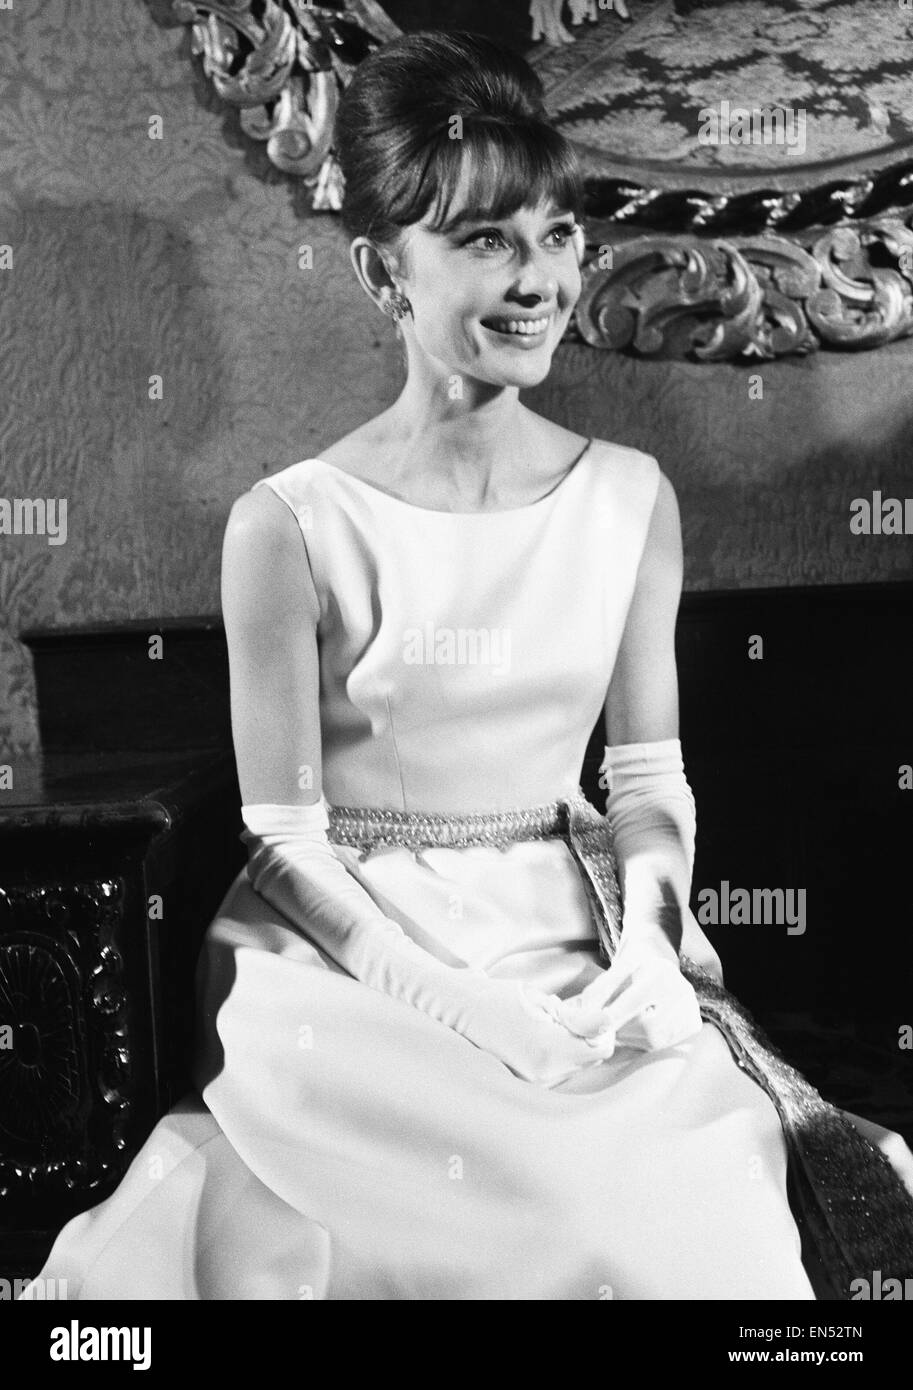 Actress Audrey Hepburn at the London premiere of her latest movie 'Breakfast At Tiffany's' at the Plaza Theatre. 19th October 1961. Stock Photo